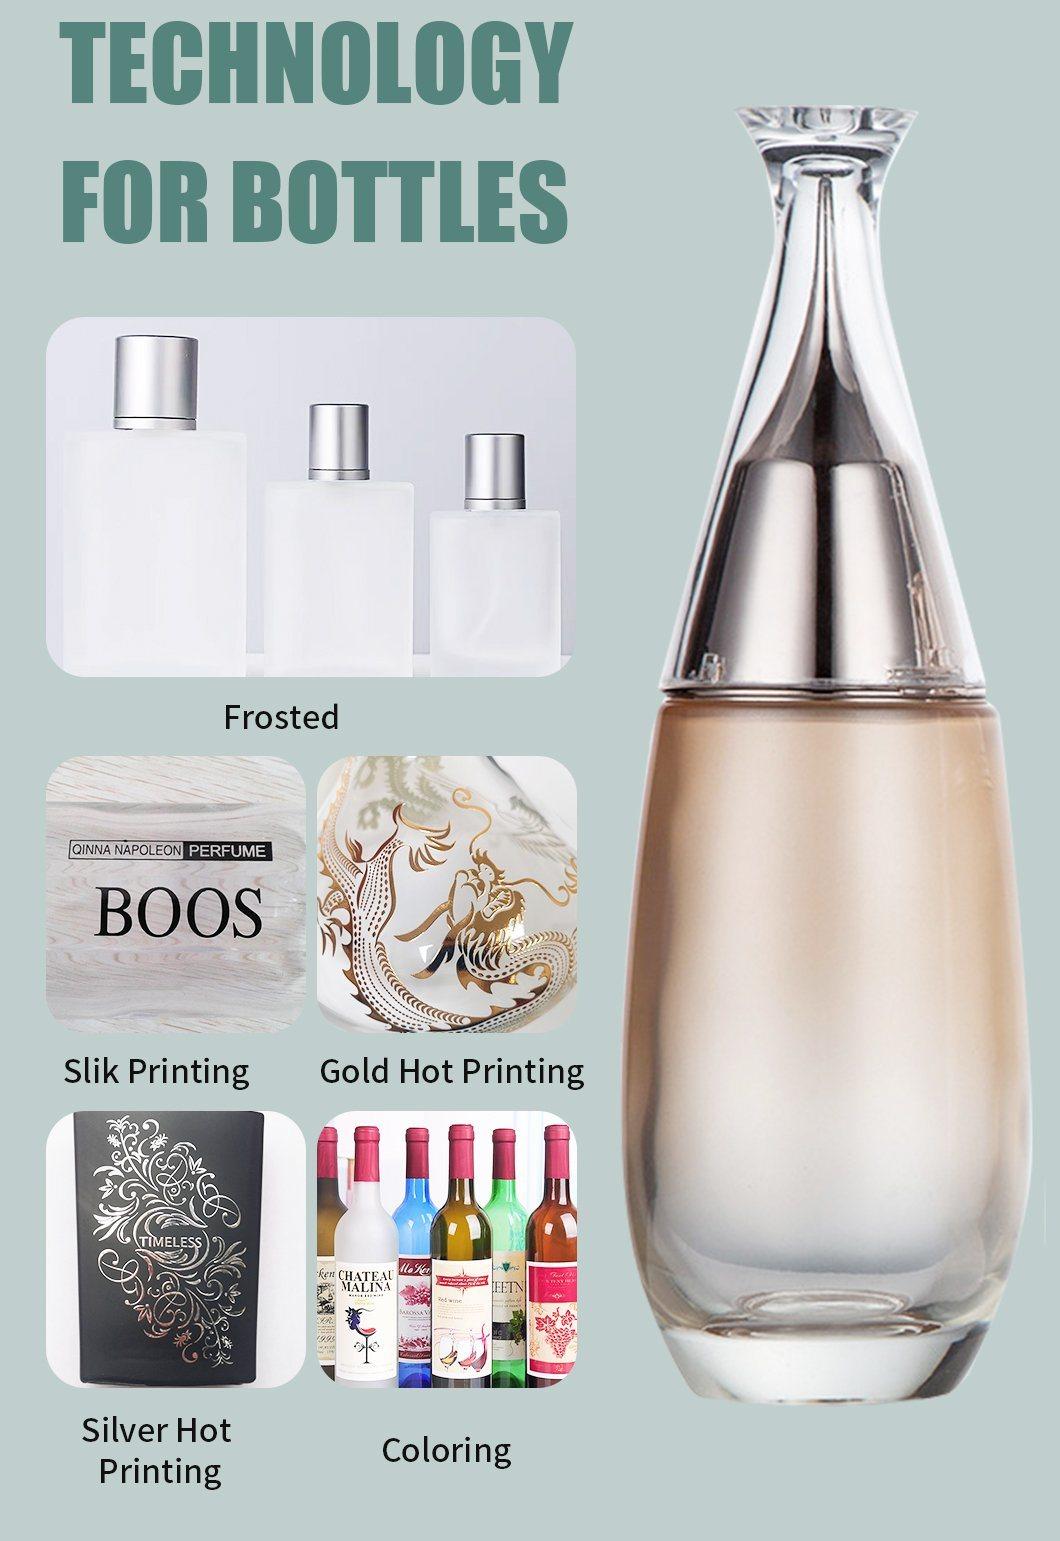 Slim Fragrance Tube Screw Caps Perfume Bottles in Colorful Designs and Gold Color